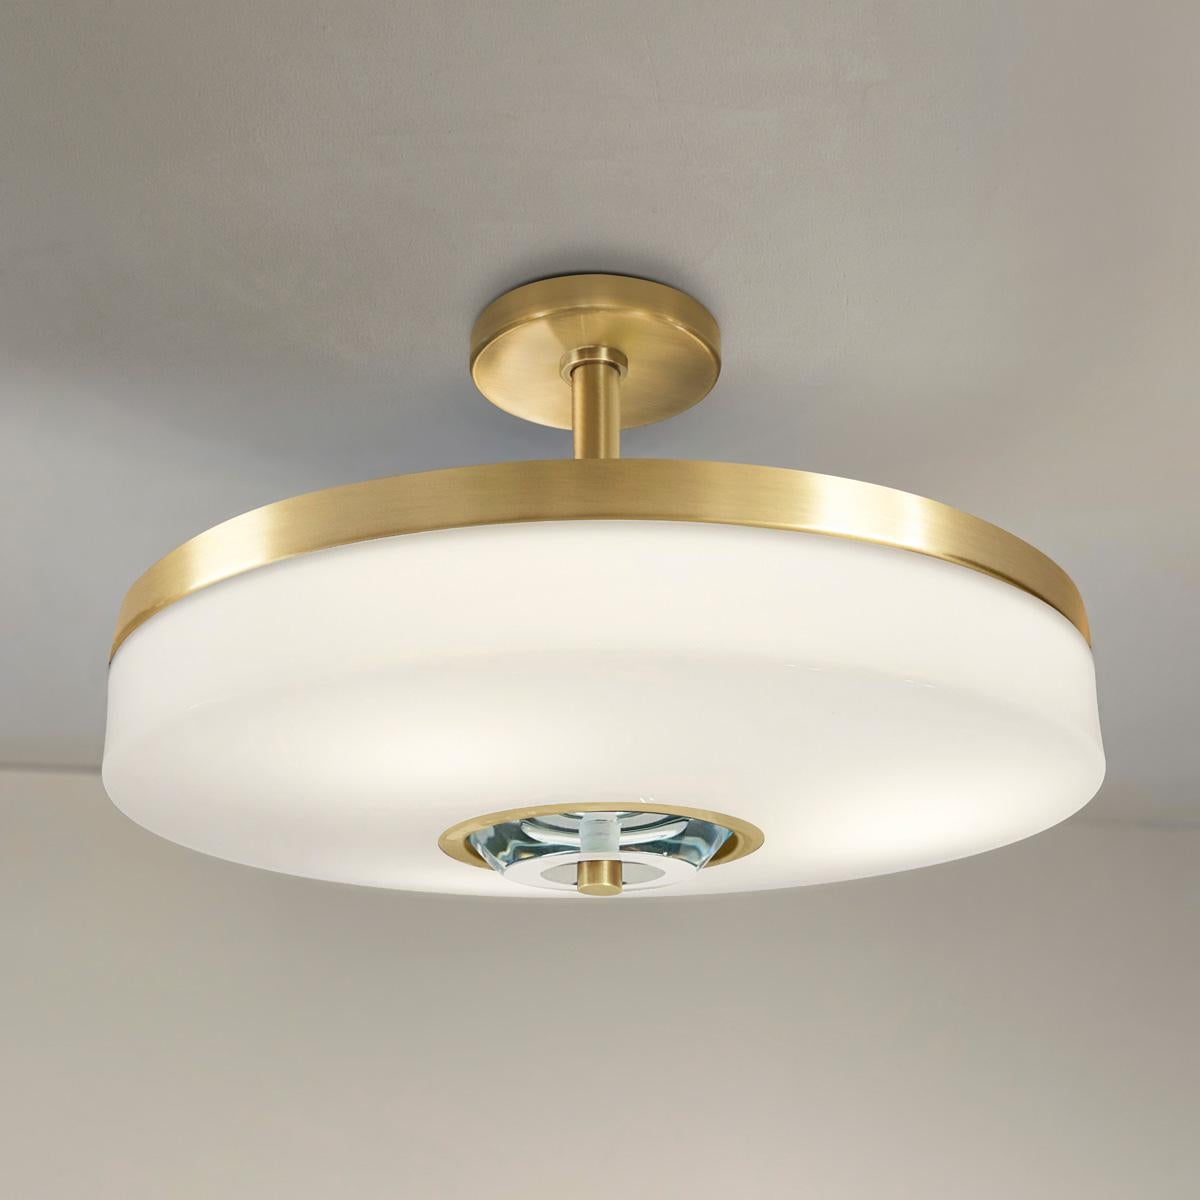 The Iris Piccolo ceiling light is designed around an acrylic shade with a hand carved glass center. This versatile fixture can be installed as a pendant on a stem or as a true flush mount. The first images show the fixture in satin brass-subsequent